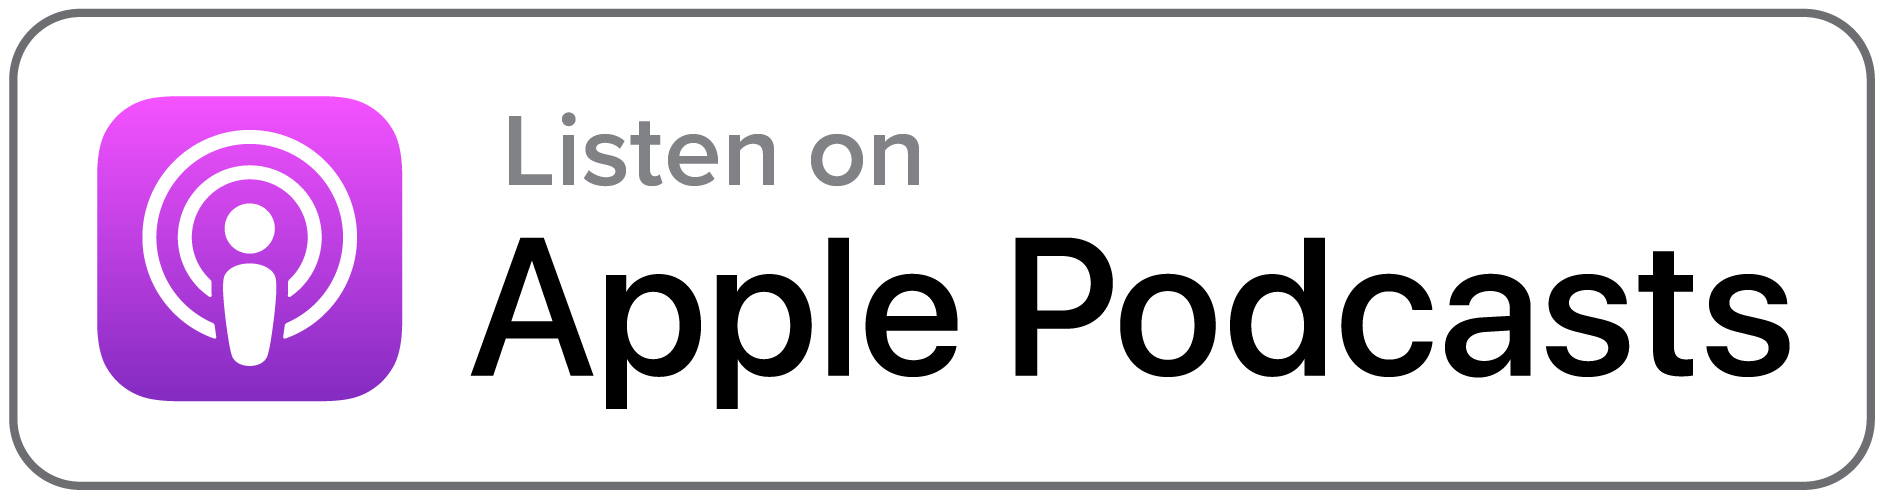 120-apple-podcasts-badge.png